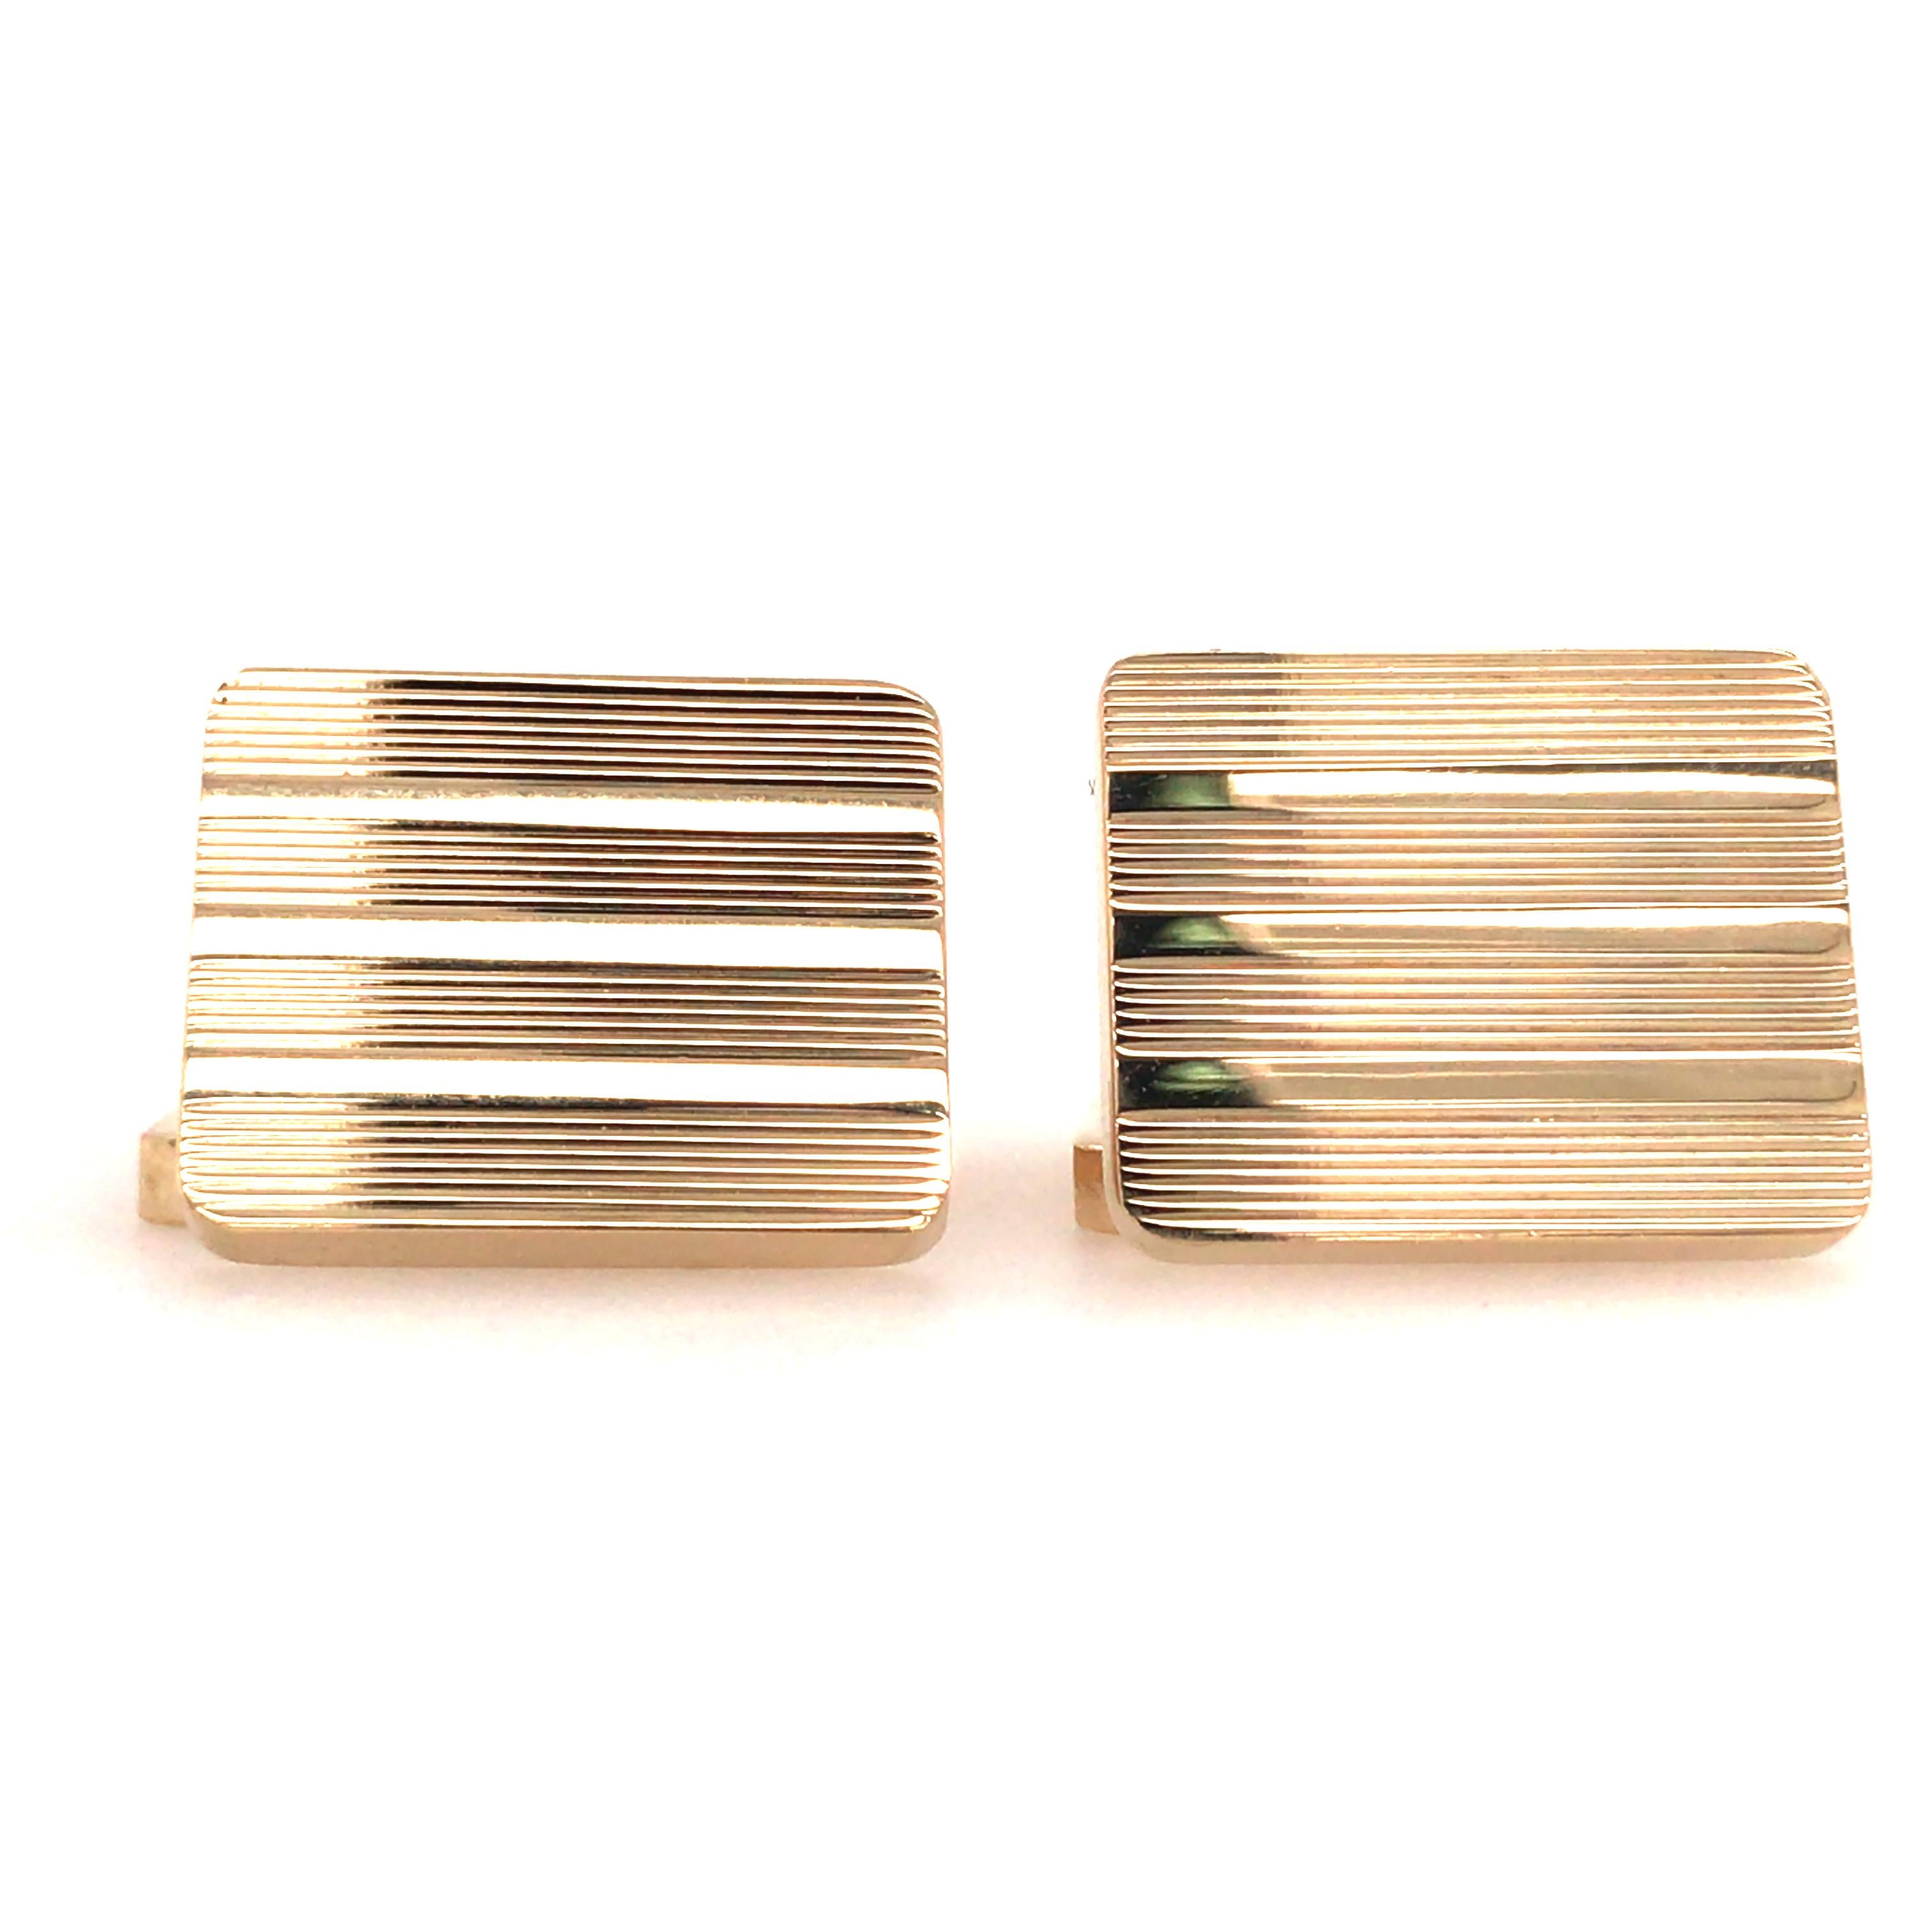 Tiffany & Co. Cufflinks in 14K Yellow Gold.  Each rectangle measures 5/8 inch in length and 1/2 inch in width.  19.12 grams.  Stamped 